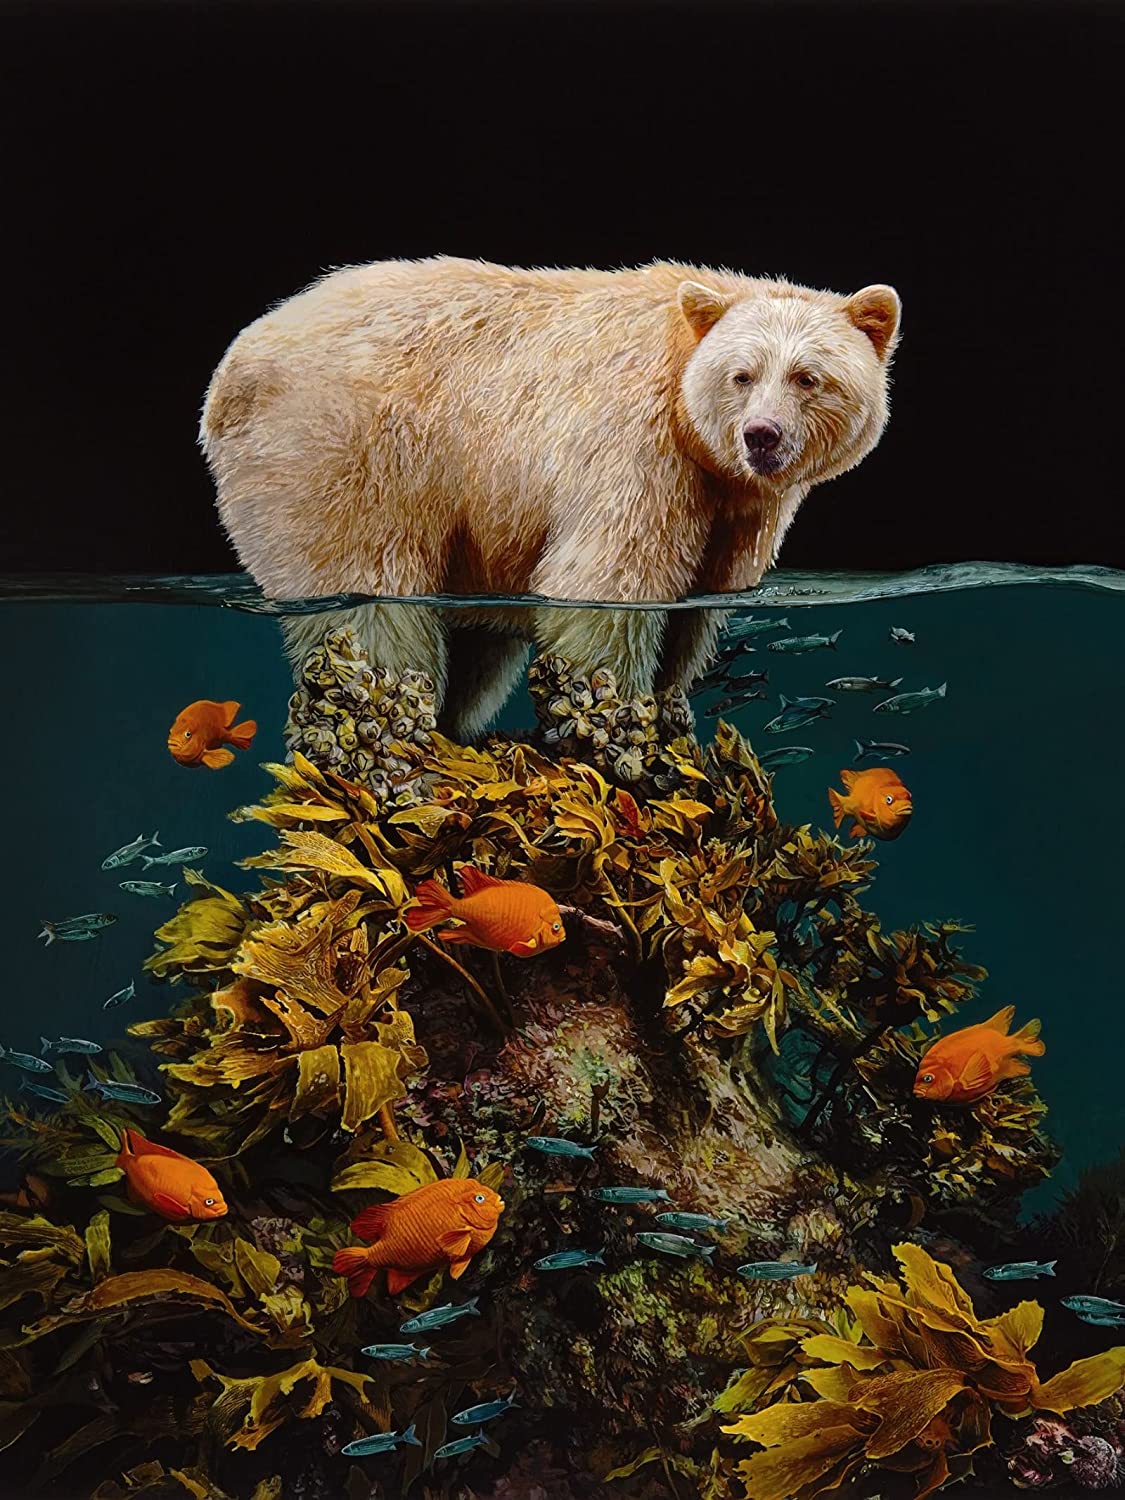 Bear In The Water 5D Diamond Painting